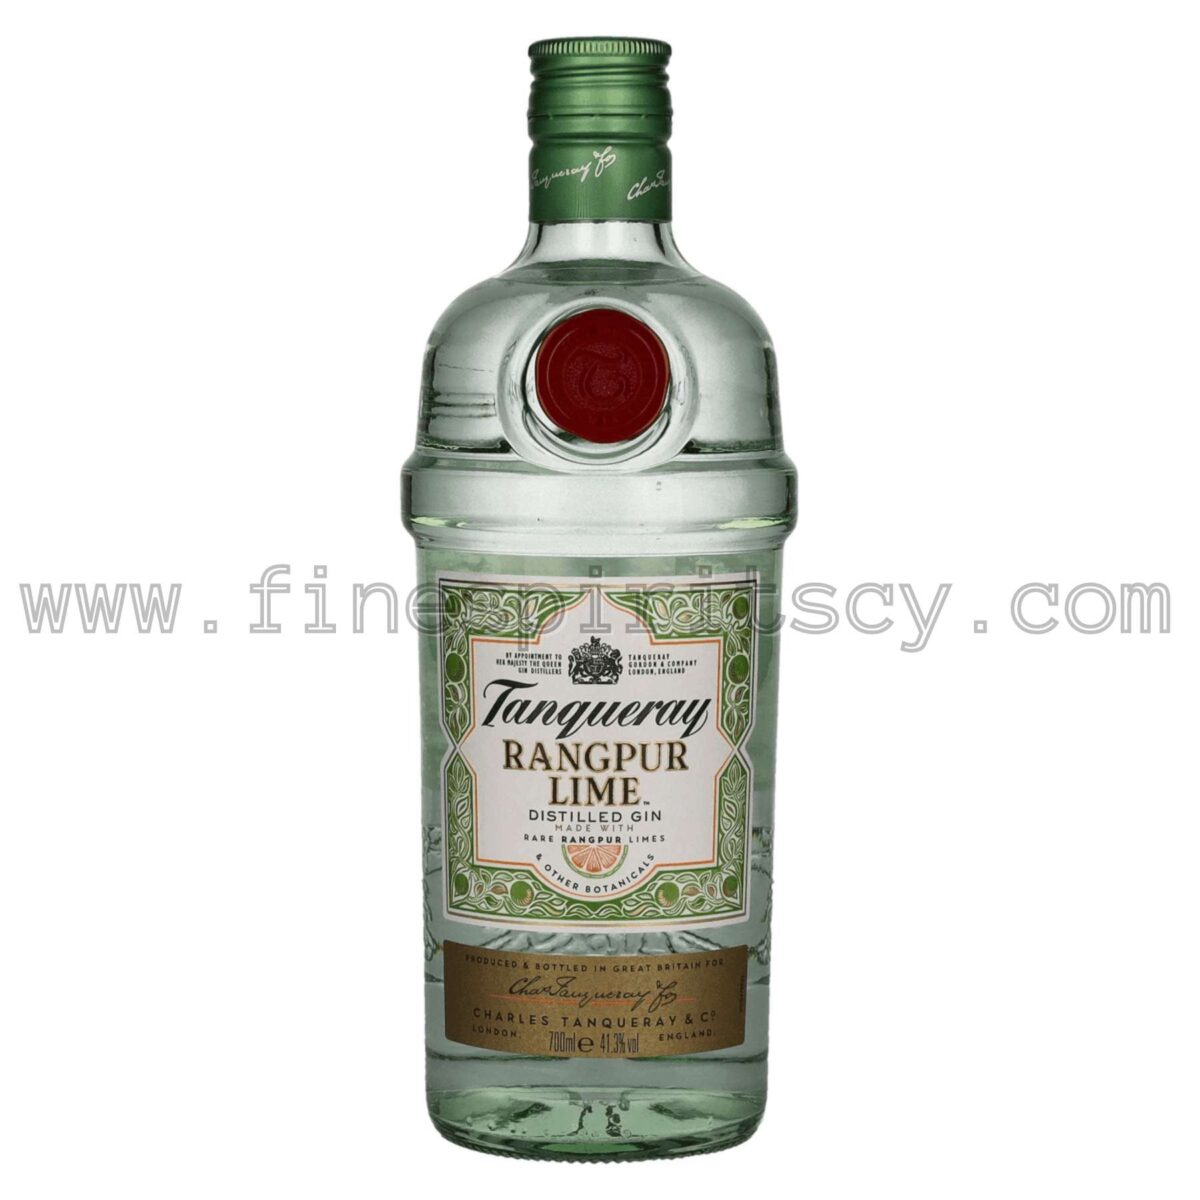 Tanqueray Rangpur Lime Gin Cyprus Price Online Order 700ml 70cl 0.7L Buy